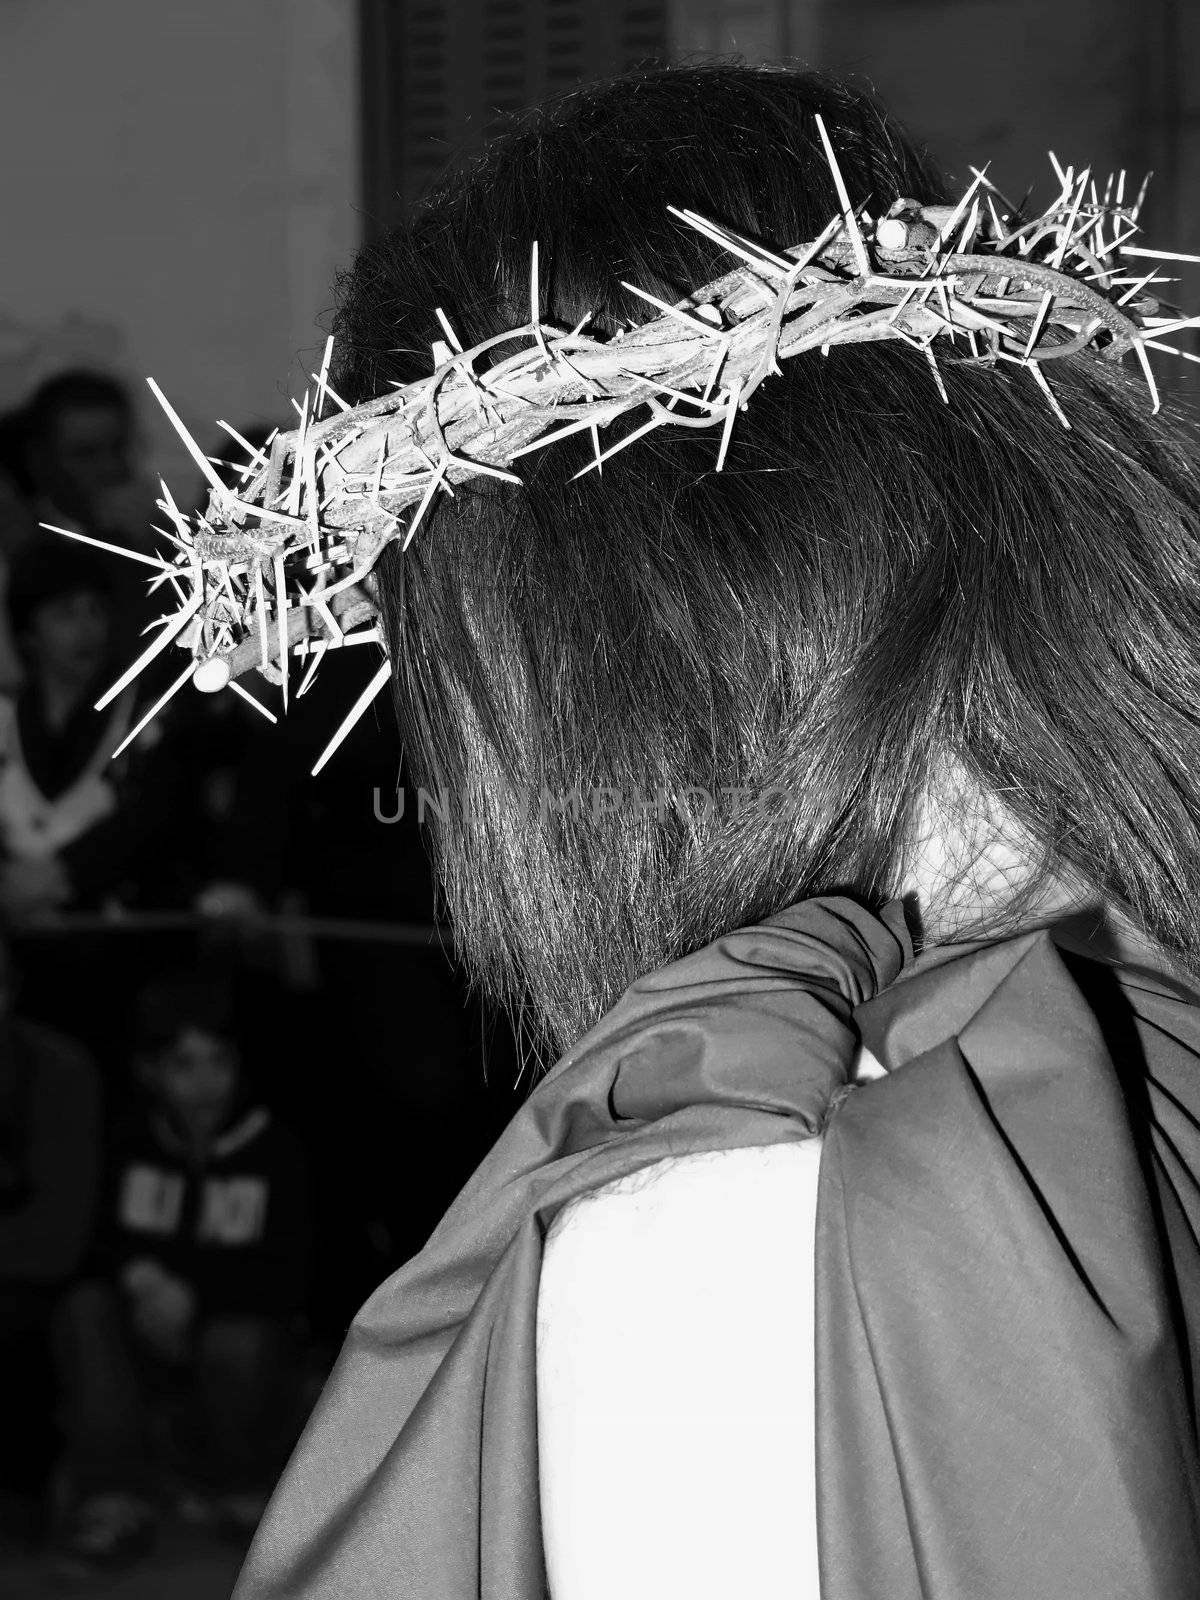 Man portraying Jesus; wearing real crown of thorns during Good Friday procession in Malta